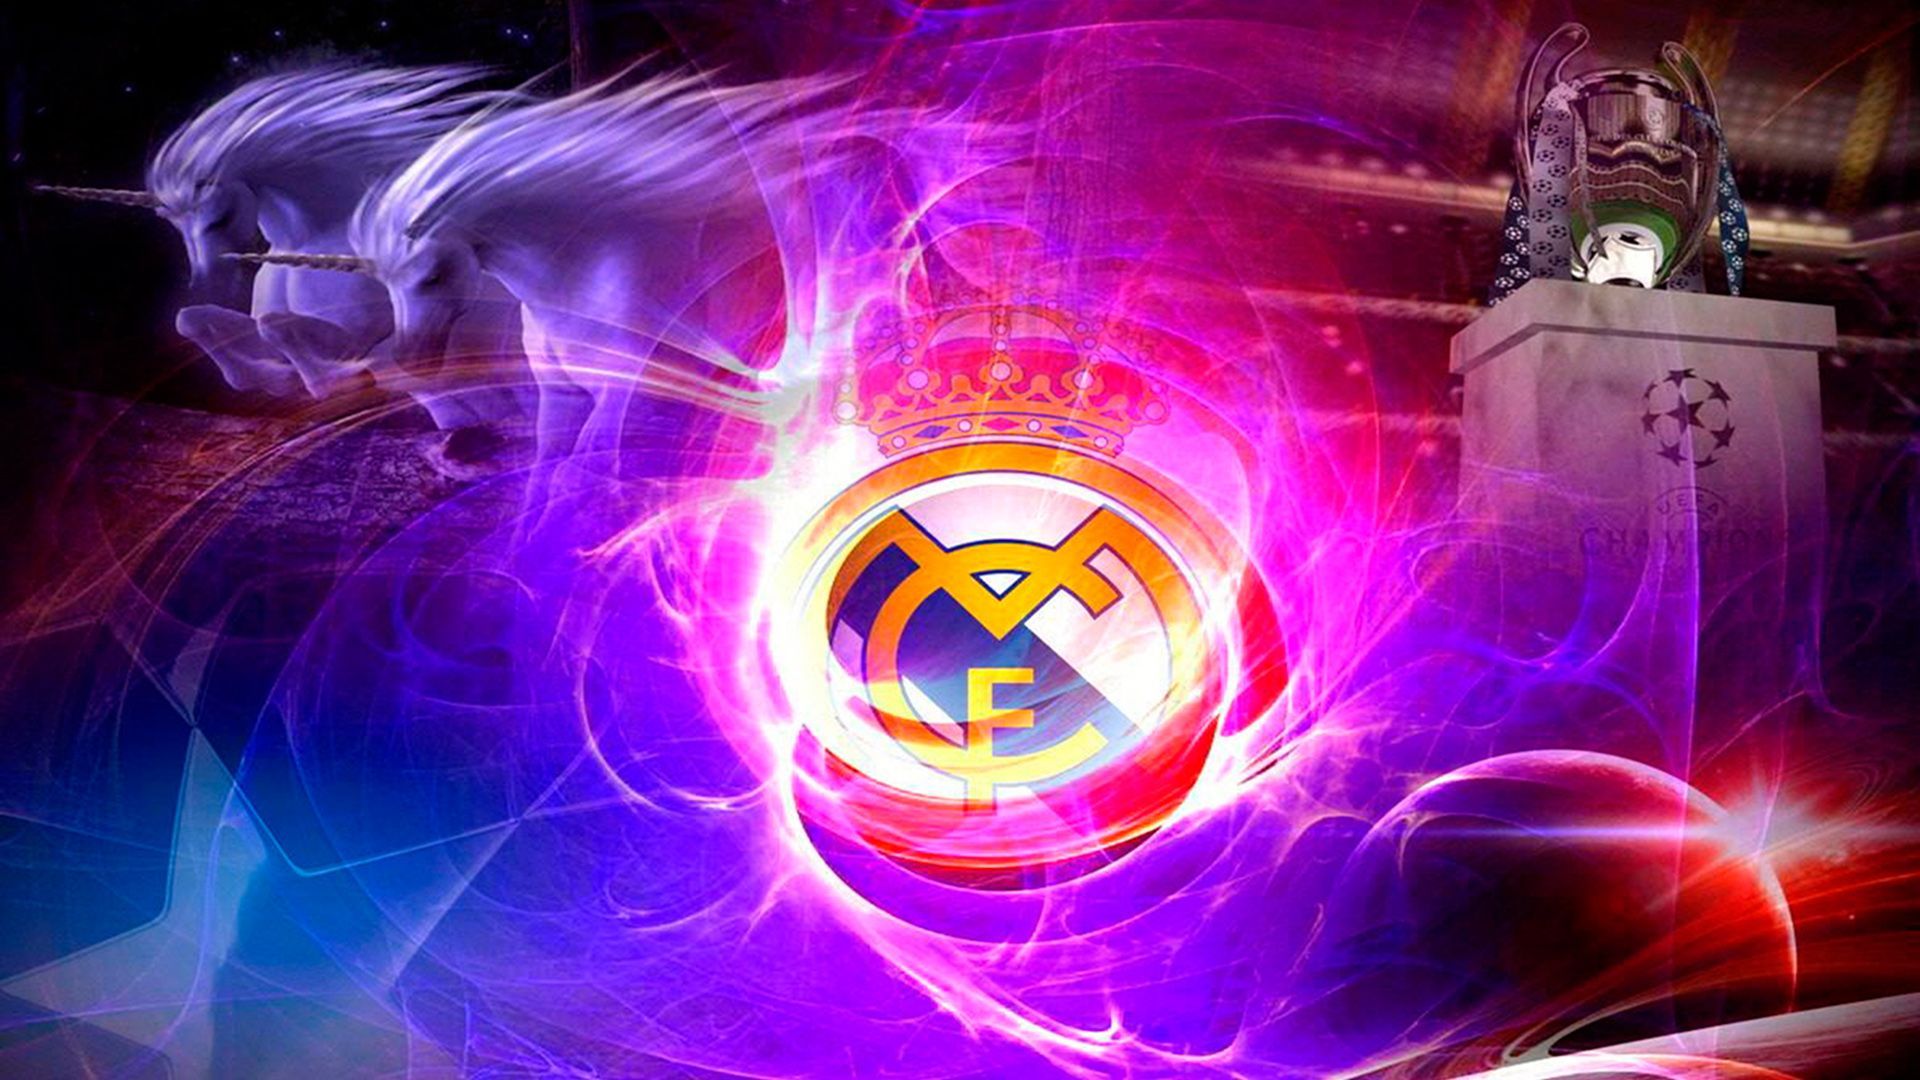 Real Madrid HD Wallpapers | Real Madrid Images | Cool Wallpapers